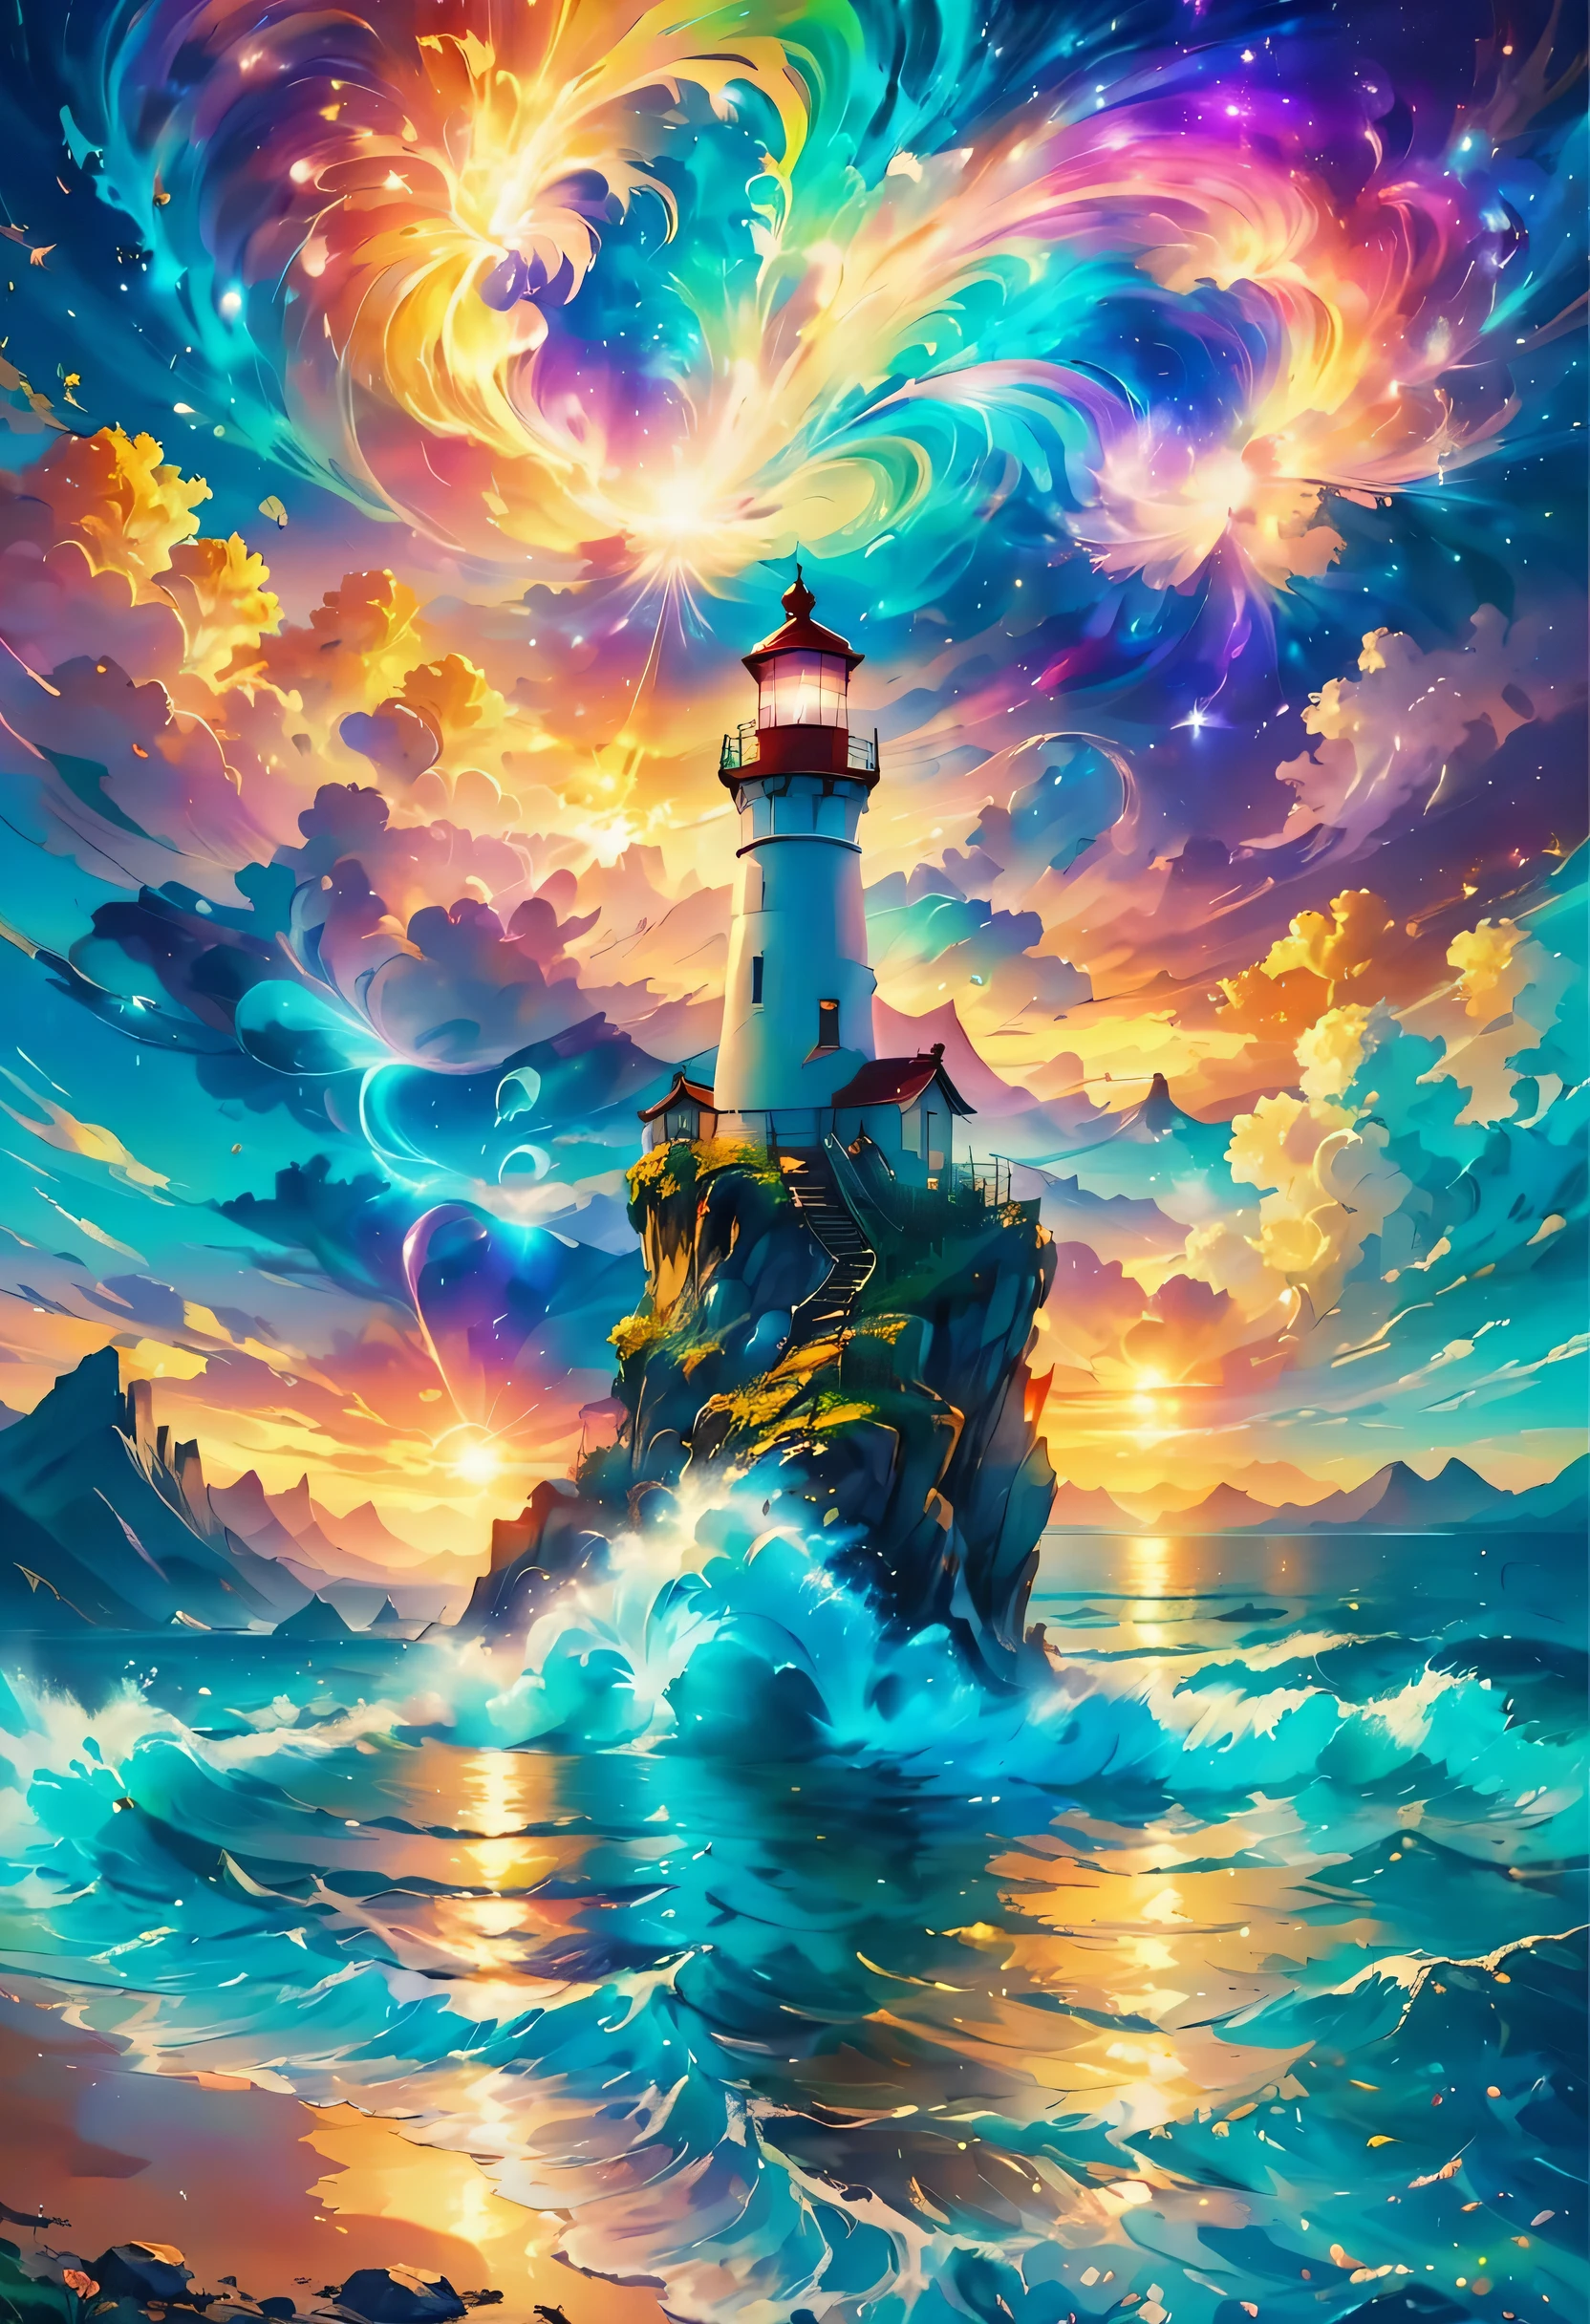 The aesthetics of vaporwave,Landscape painting,Lighthouse colored in neon colors,port town,marina,boat,moon,star,cloud,aurora,beautiful,rich colors,flash,と明るいflash,Cast colorful spells,Draw in neon colors on a dark background,古き良きport townの風景と現代アートの融合,Pop Illustration,poster,perfect composition,Design that expresses Italy,tangled,magic element,wonderful,masterpiece,4k,works of art,Bright colors,black,pink,Light blue,purple